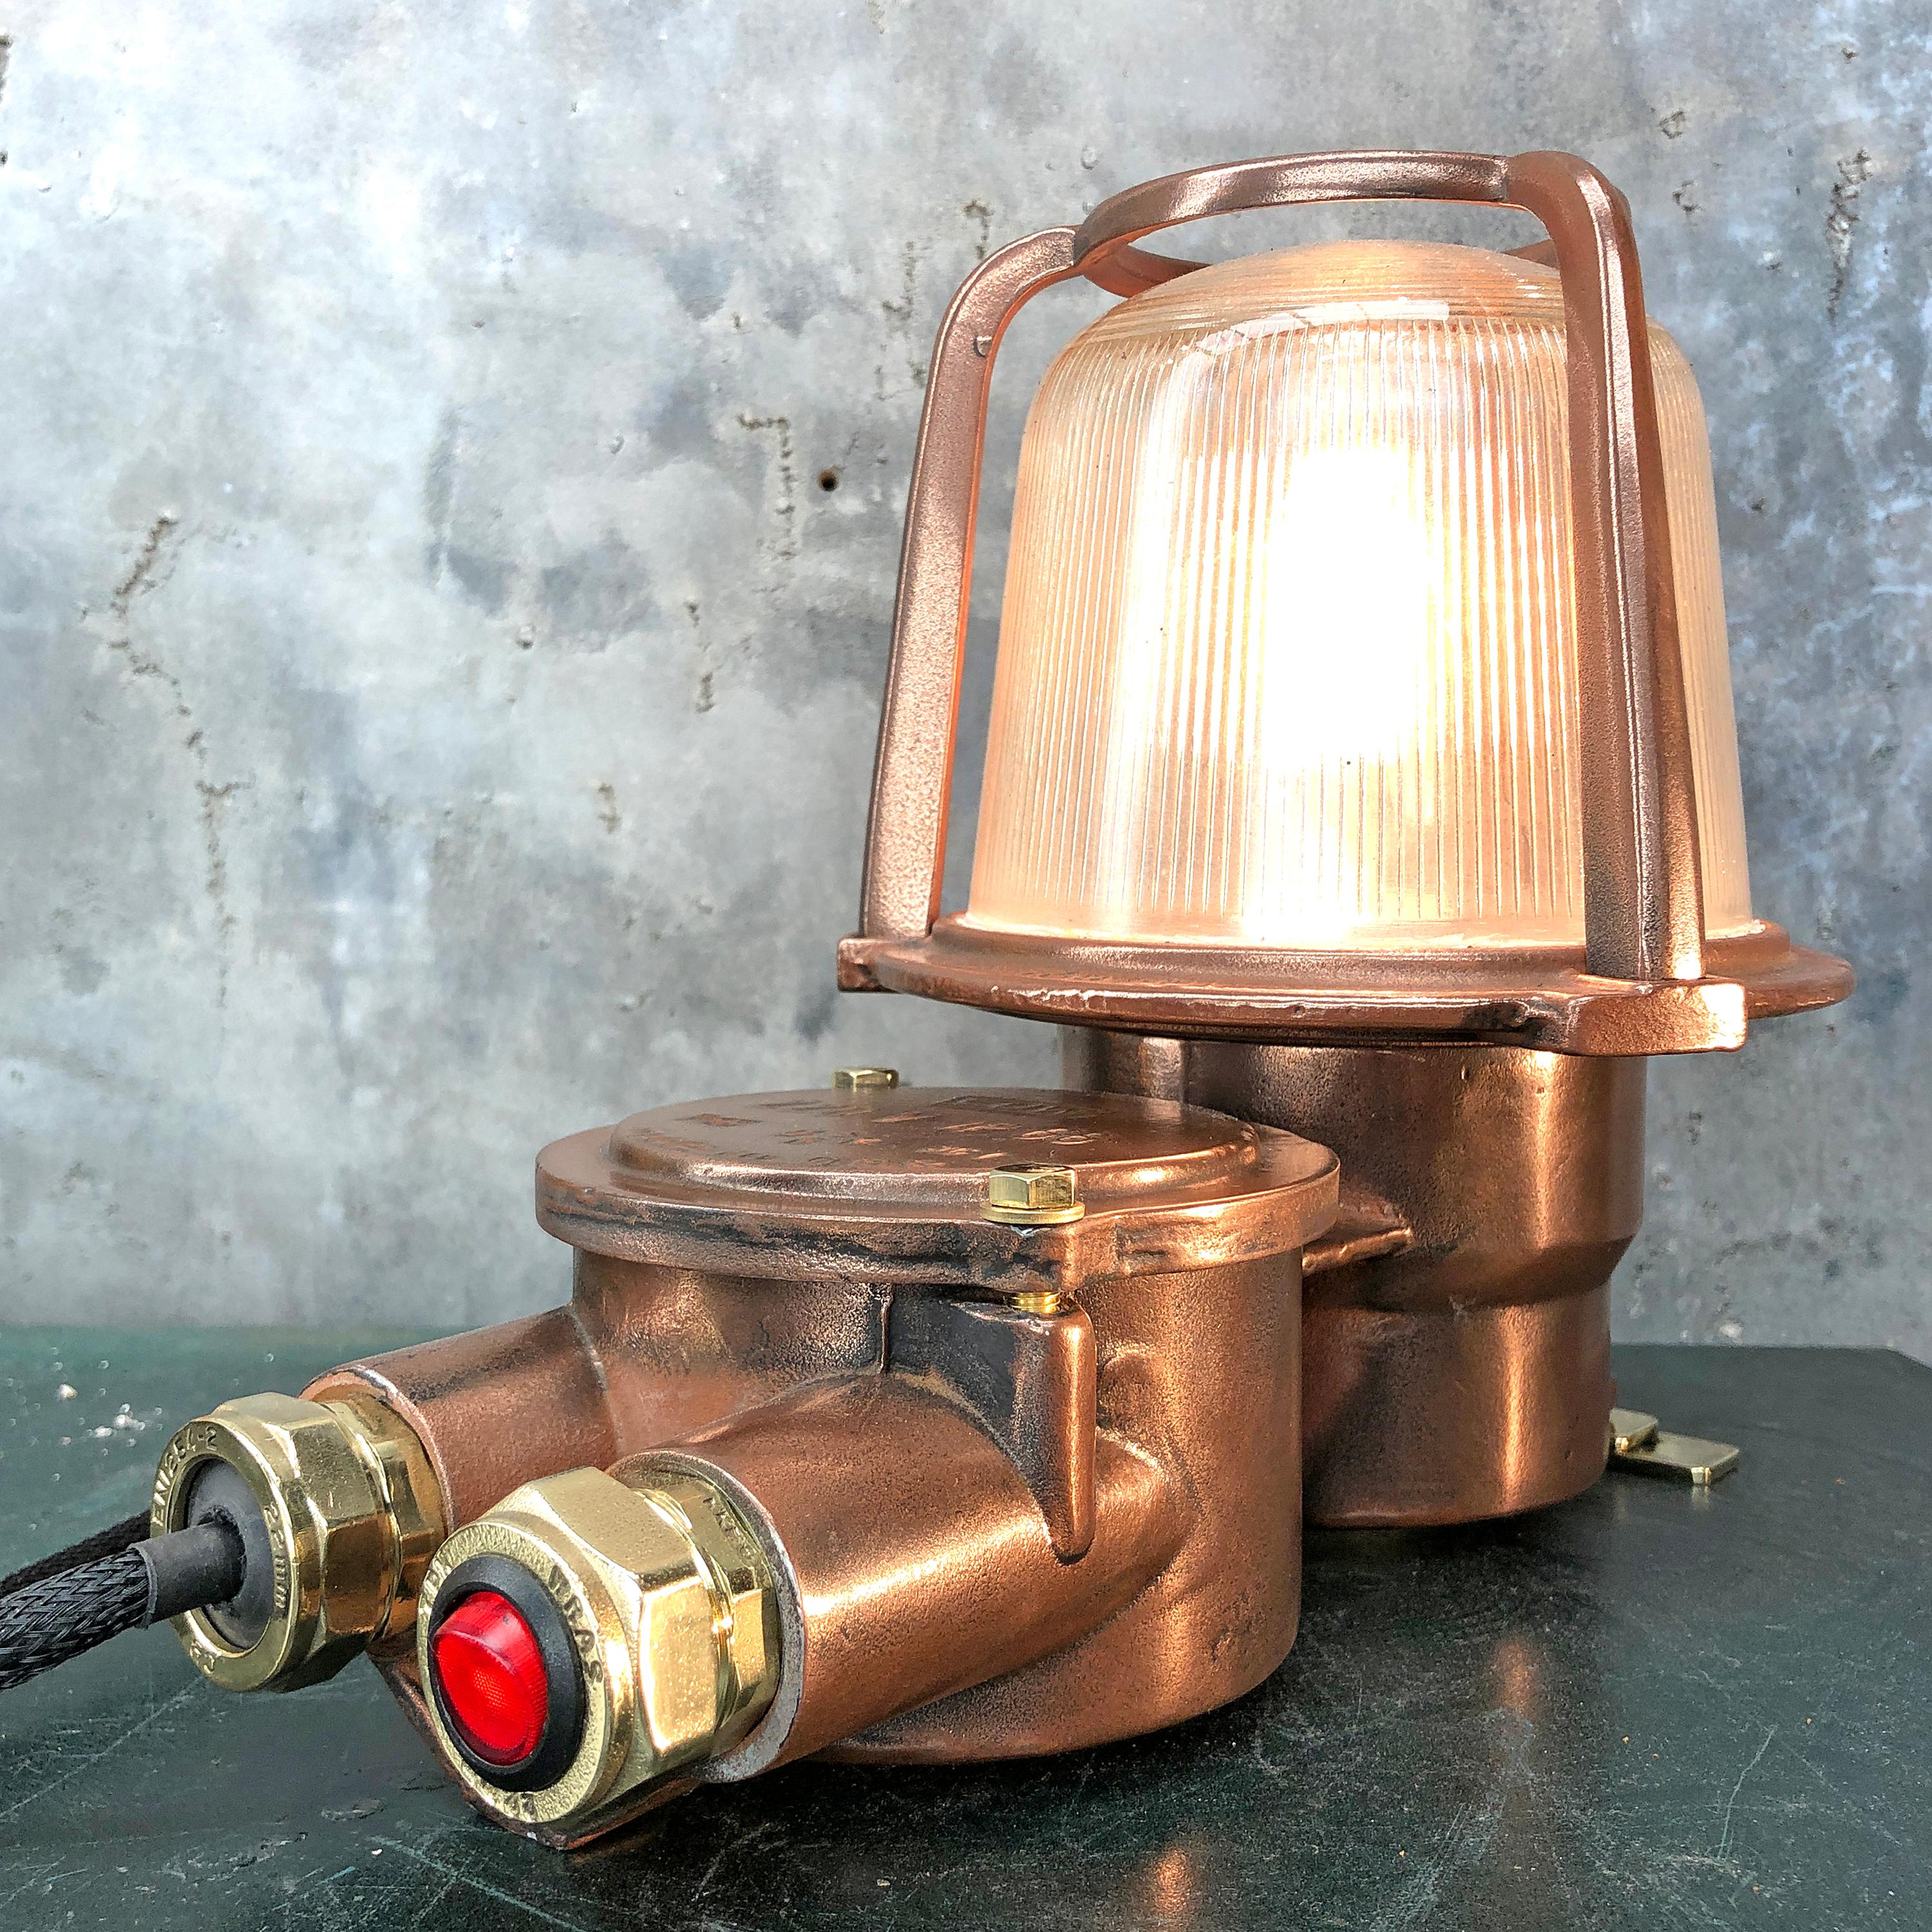 This is an authentic industrial table lamp converted from an old EOW copper and brass bulkhead lamp.

Originating from German sea going vessels built during the 1970s these lights were fitted outdoors and are fully water proof with an IP66